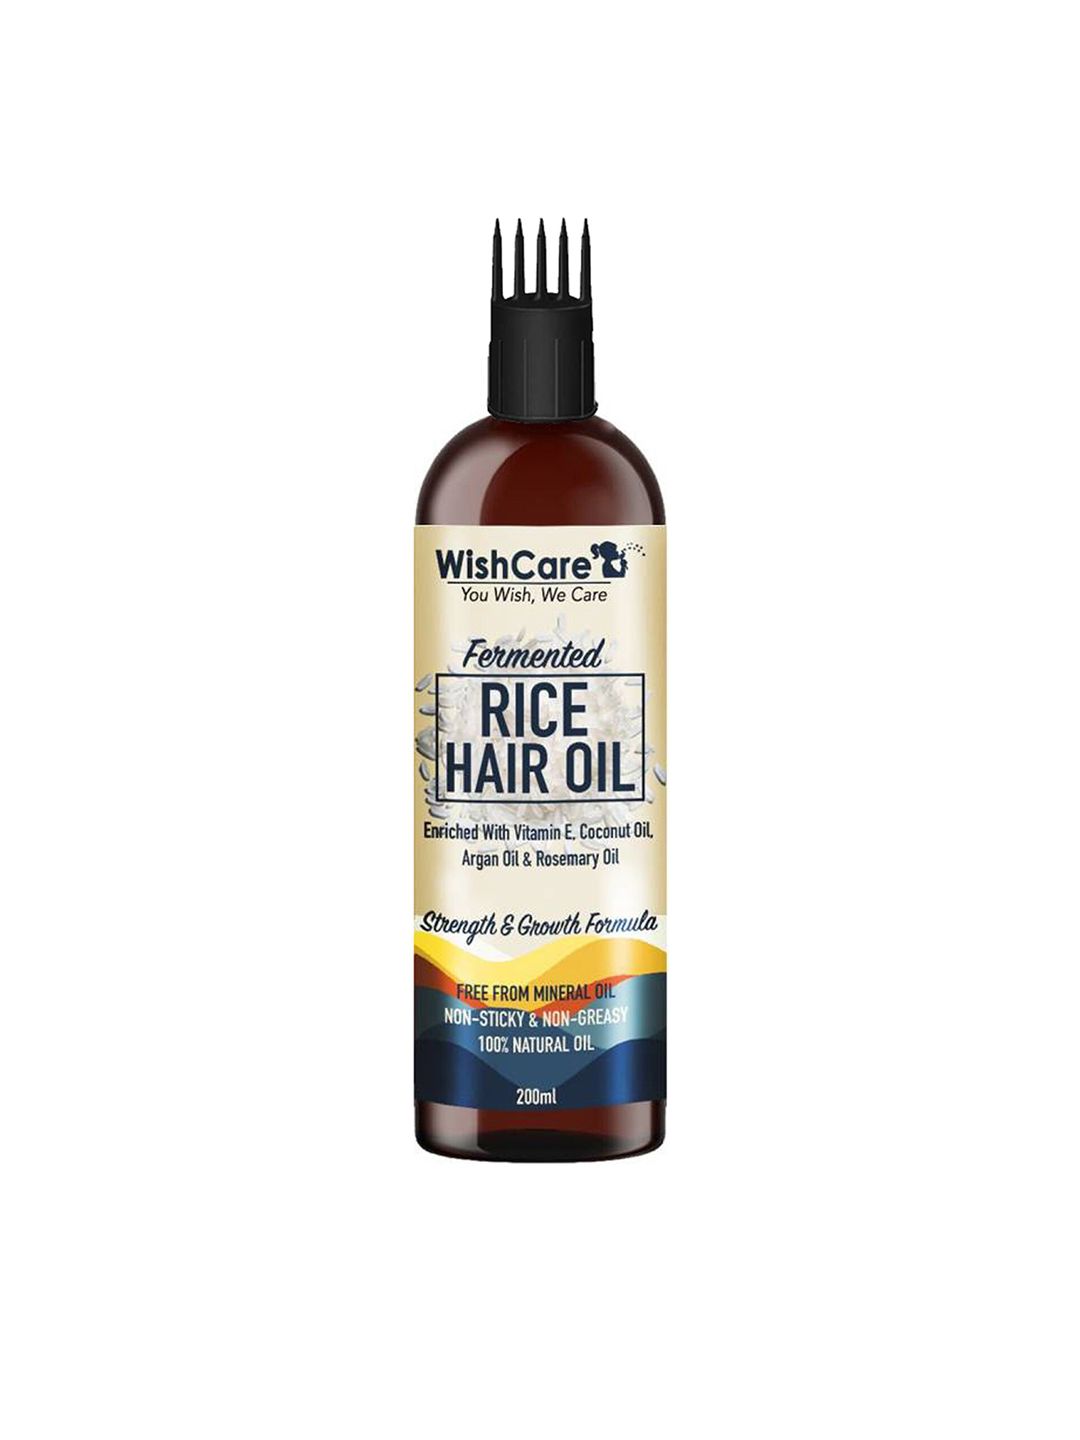 WishCare Fermented Rice Hair Oil- Increases Strength & Promotes Growth - 200 ml Price in India